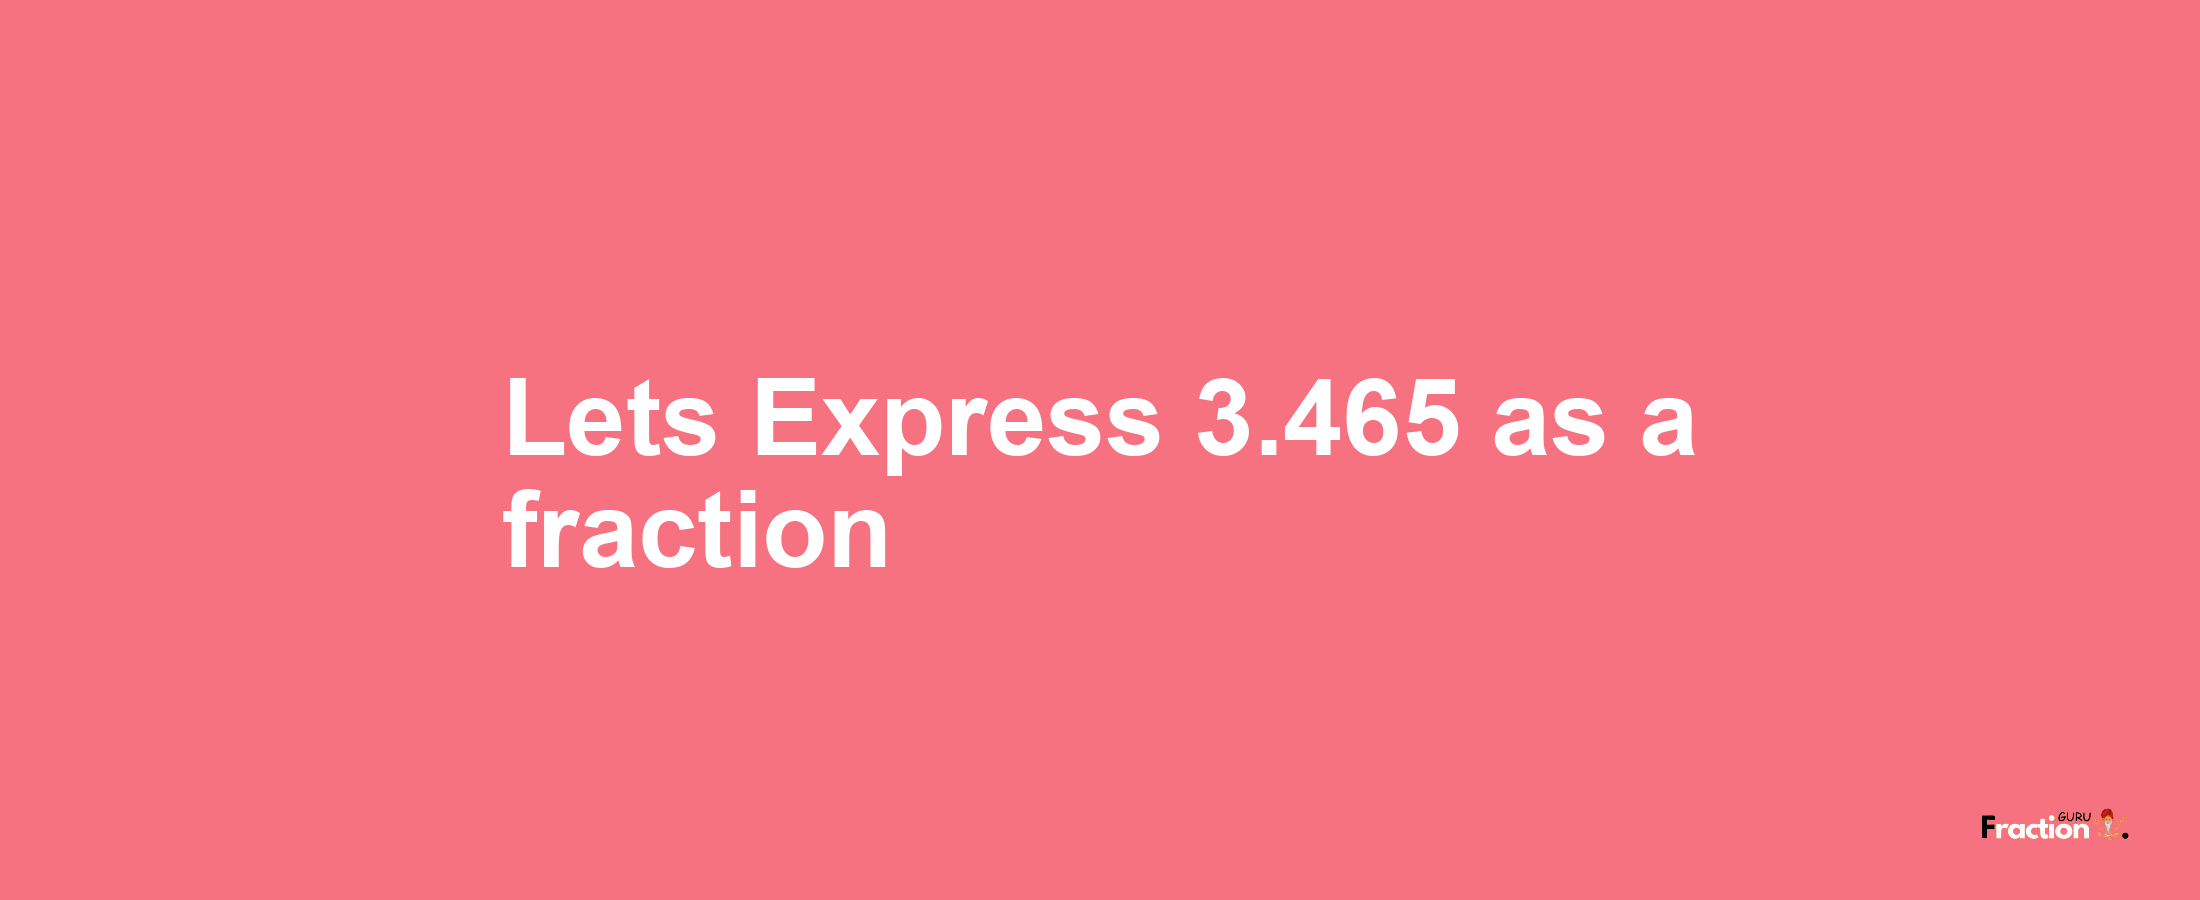 Lets Express 3.465 as afraction